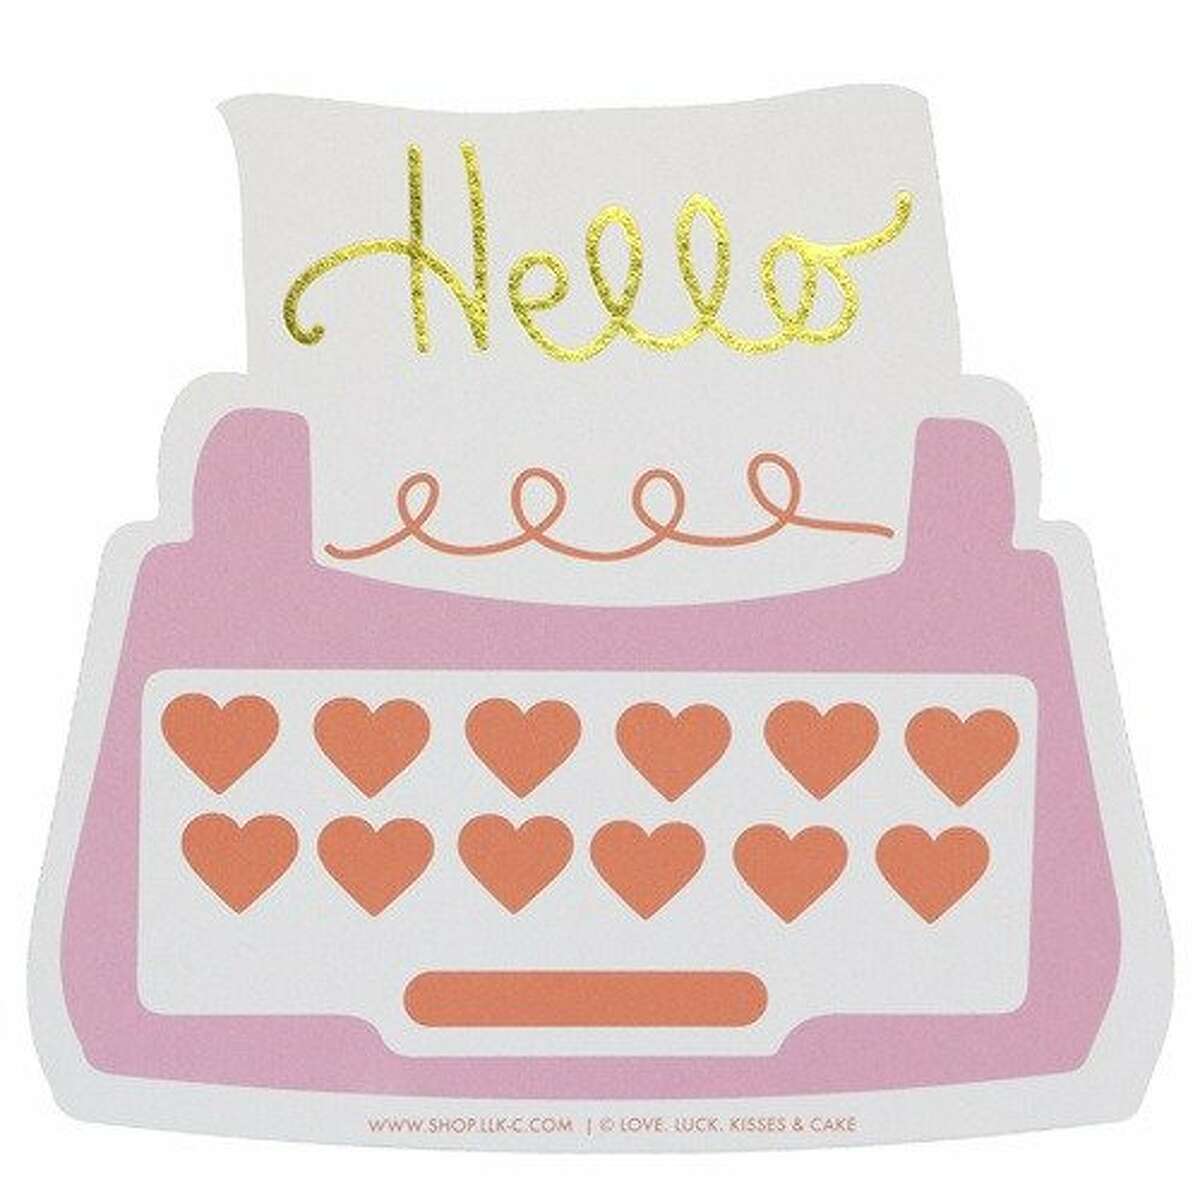 Hello Typewriter card in pink ($6.50) from Love. Luck. Kisses & Cake.